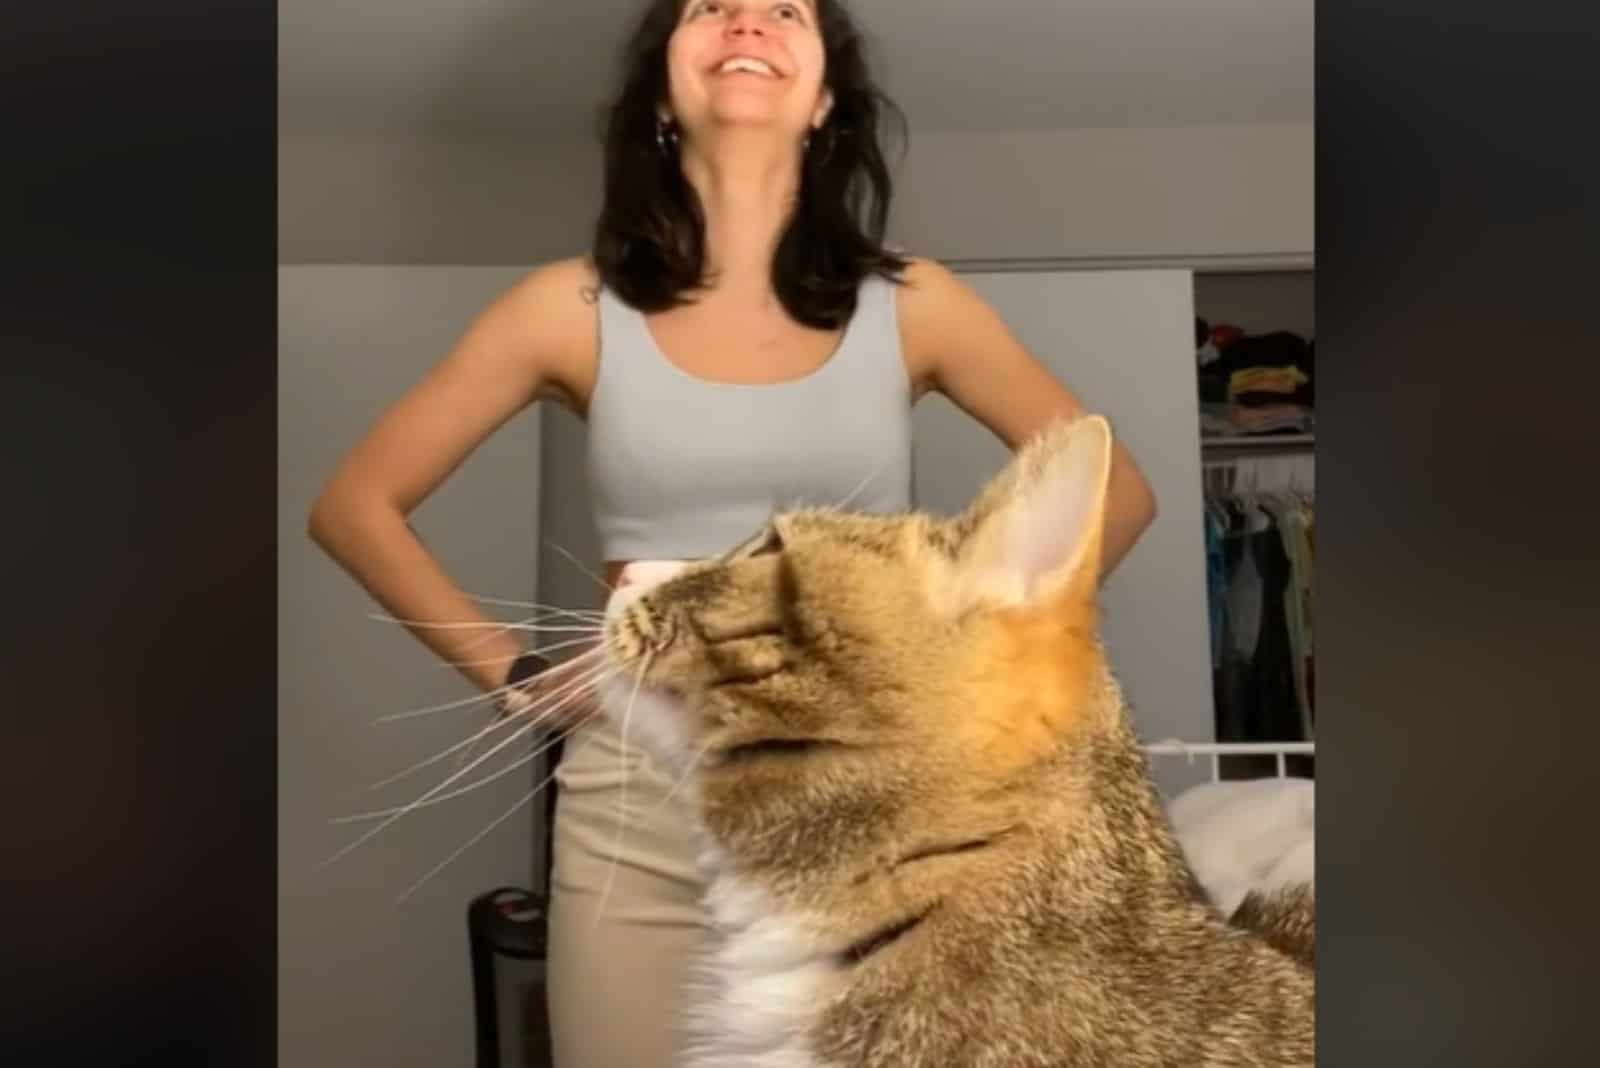 the cat looks at the woman in the video